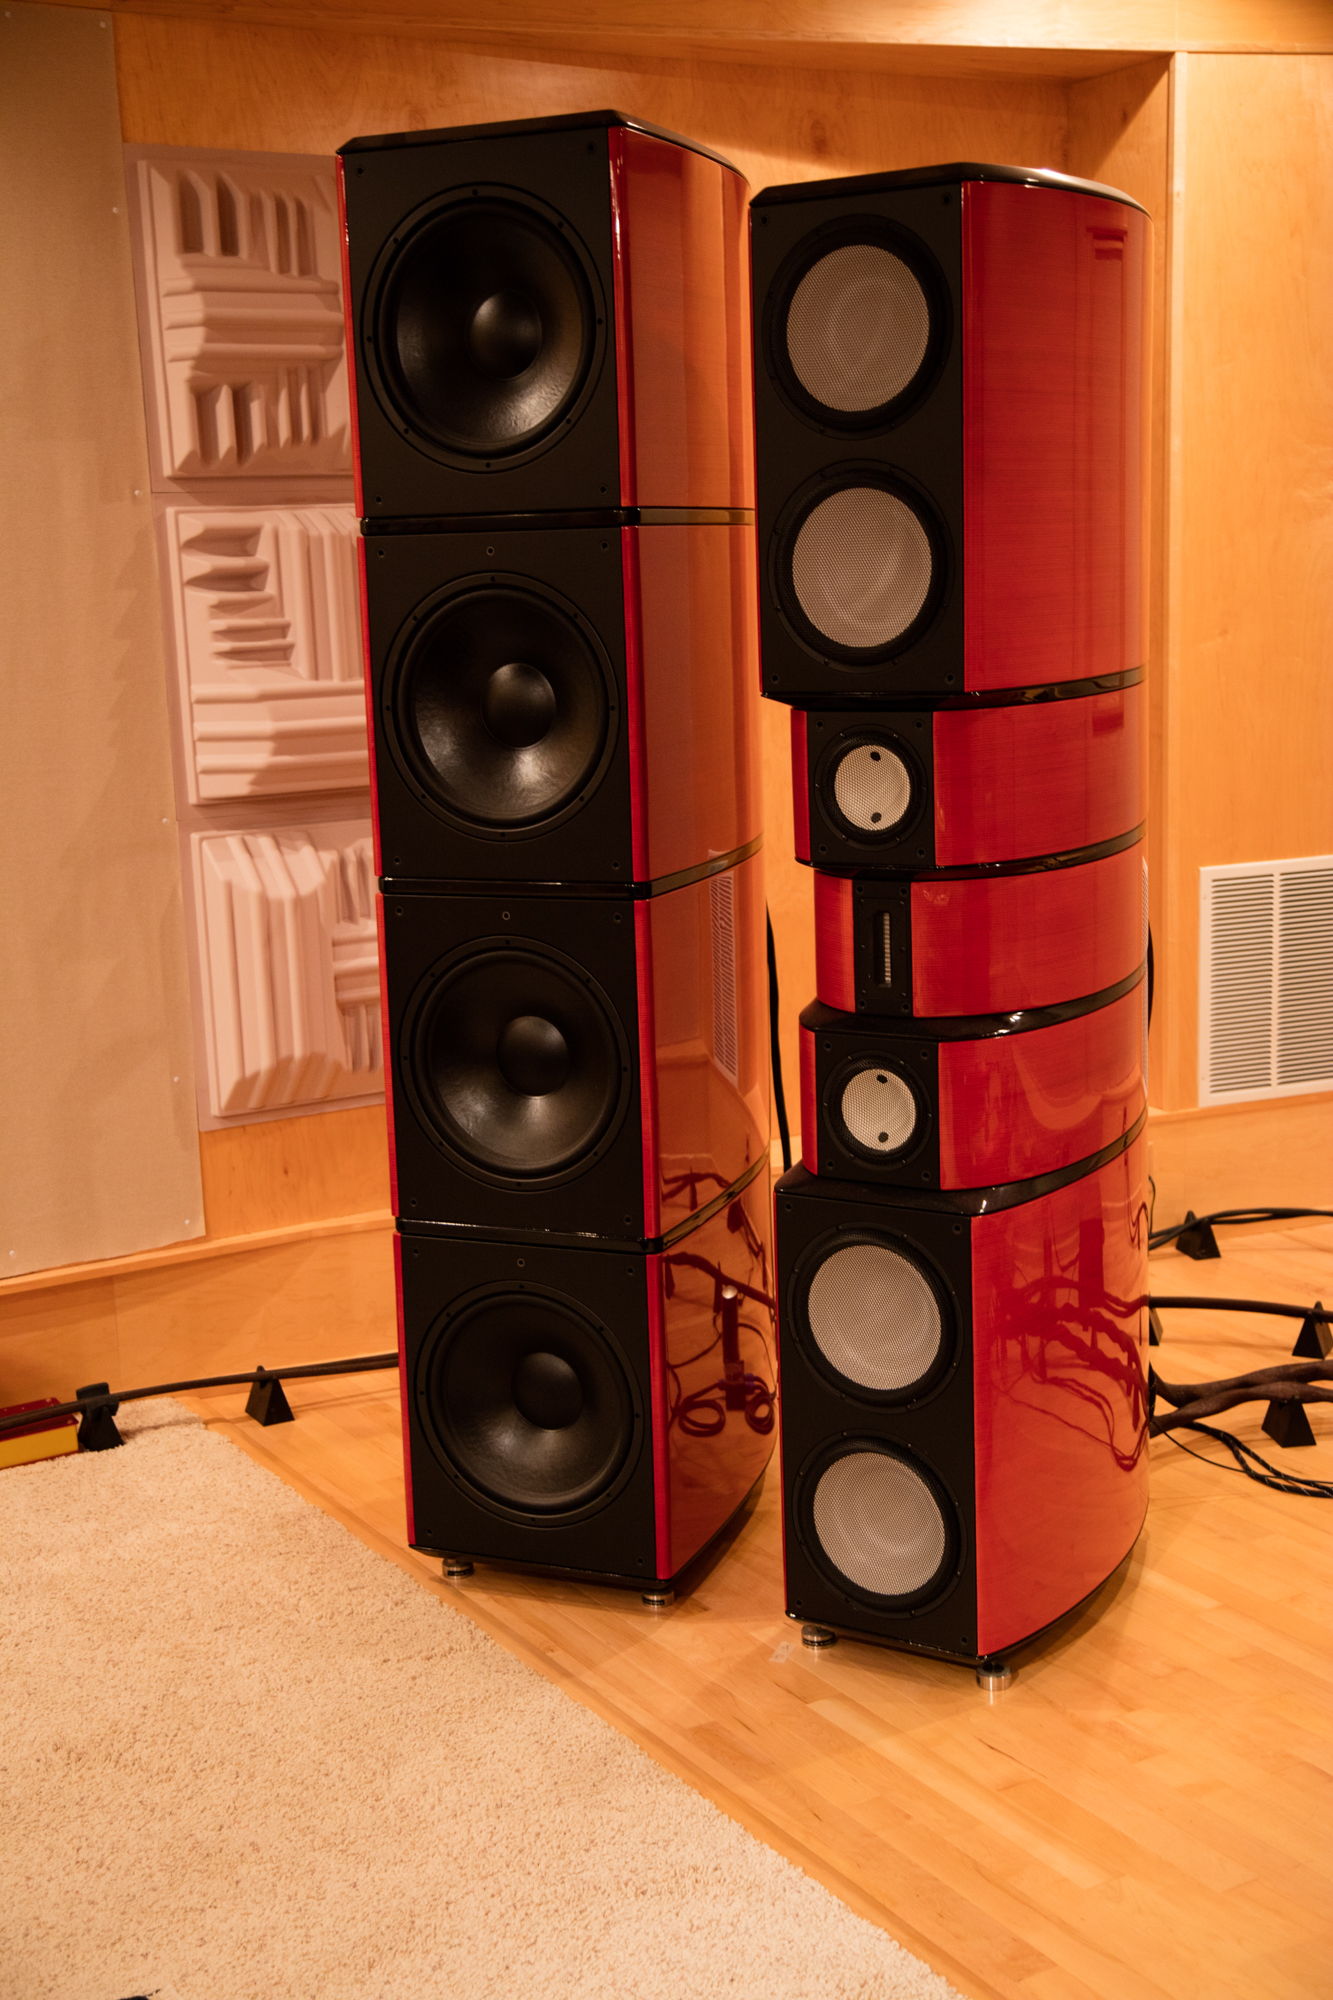 bass towers are powered and adjustable, main towers passive.